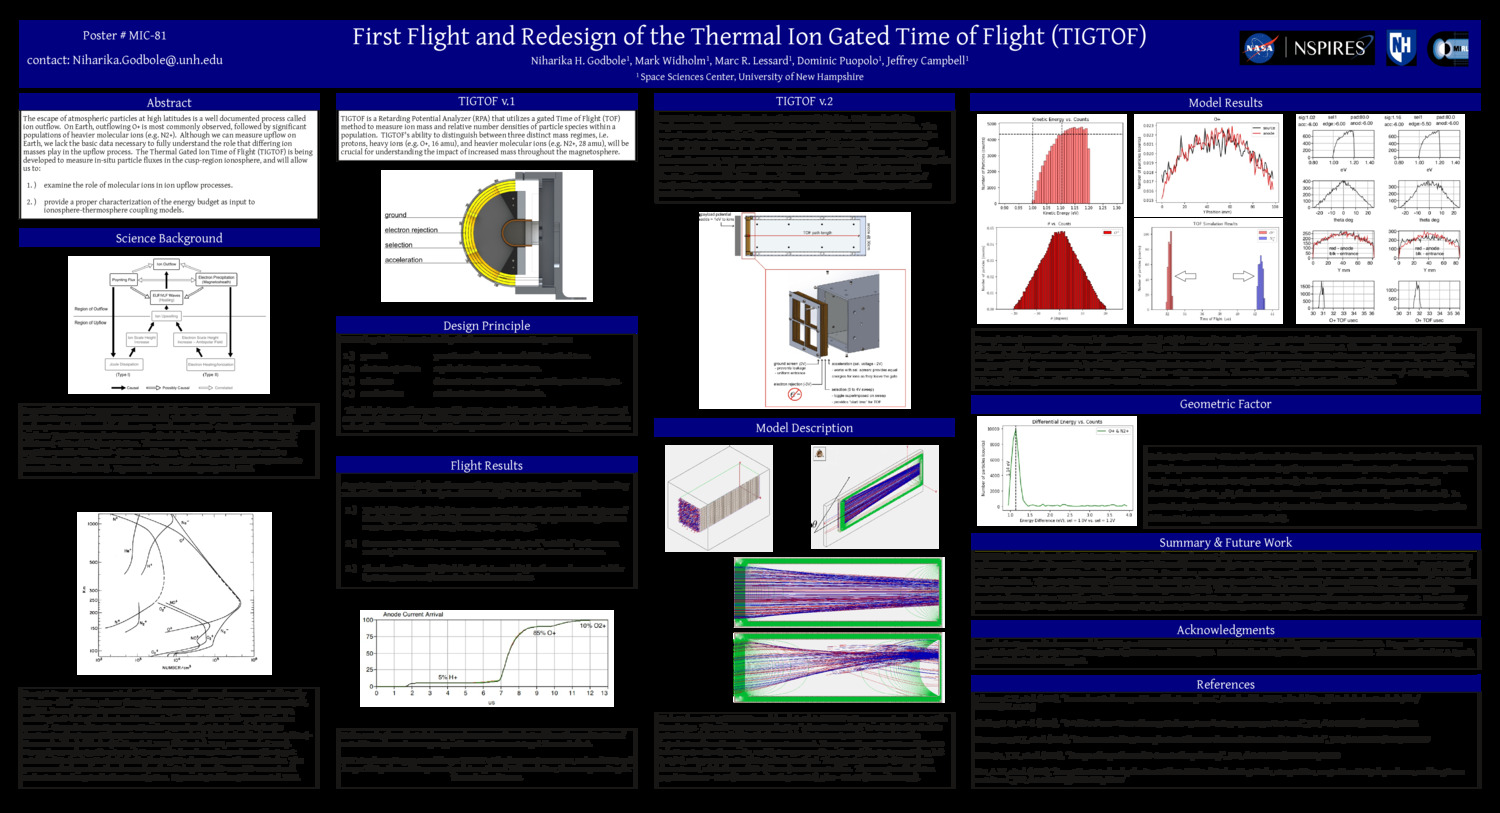 First Flight And Redesign Of The Thermal Ion Gated Tim Eof Flight (Tigtof) by nhg1005